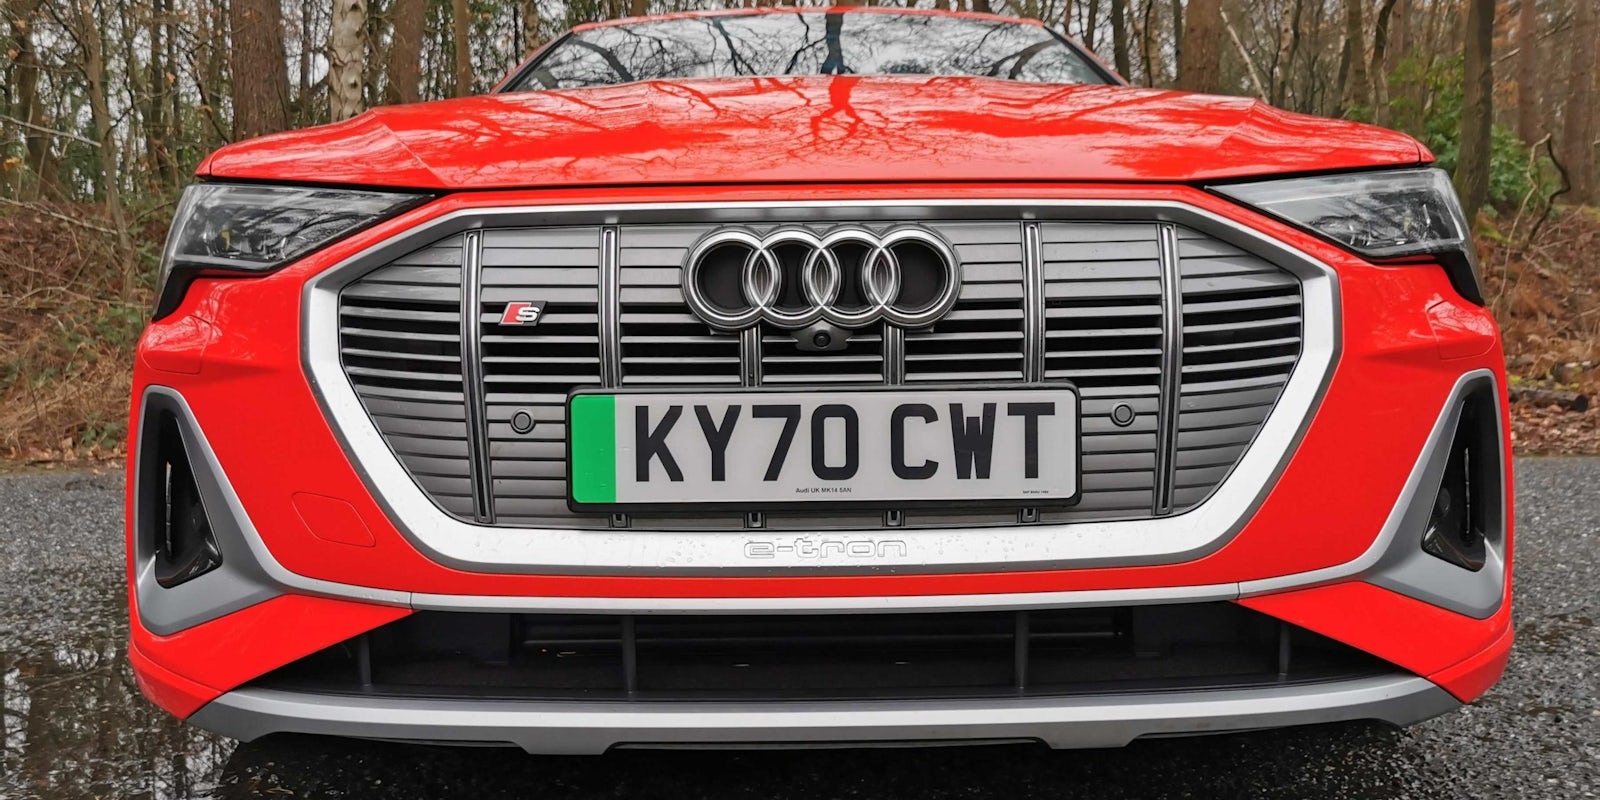 UK Number Plate Area Codes Explained 